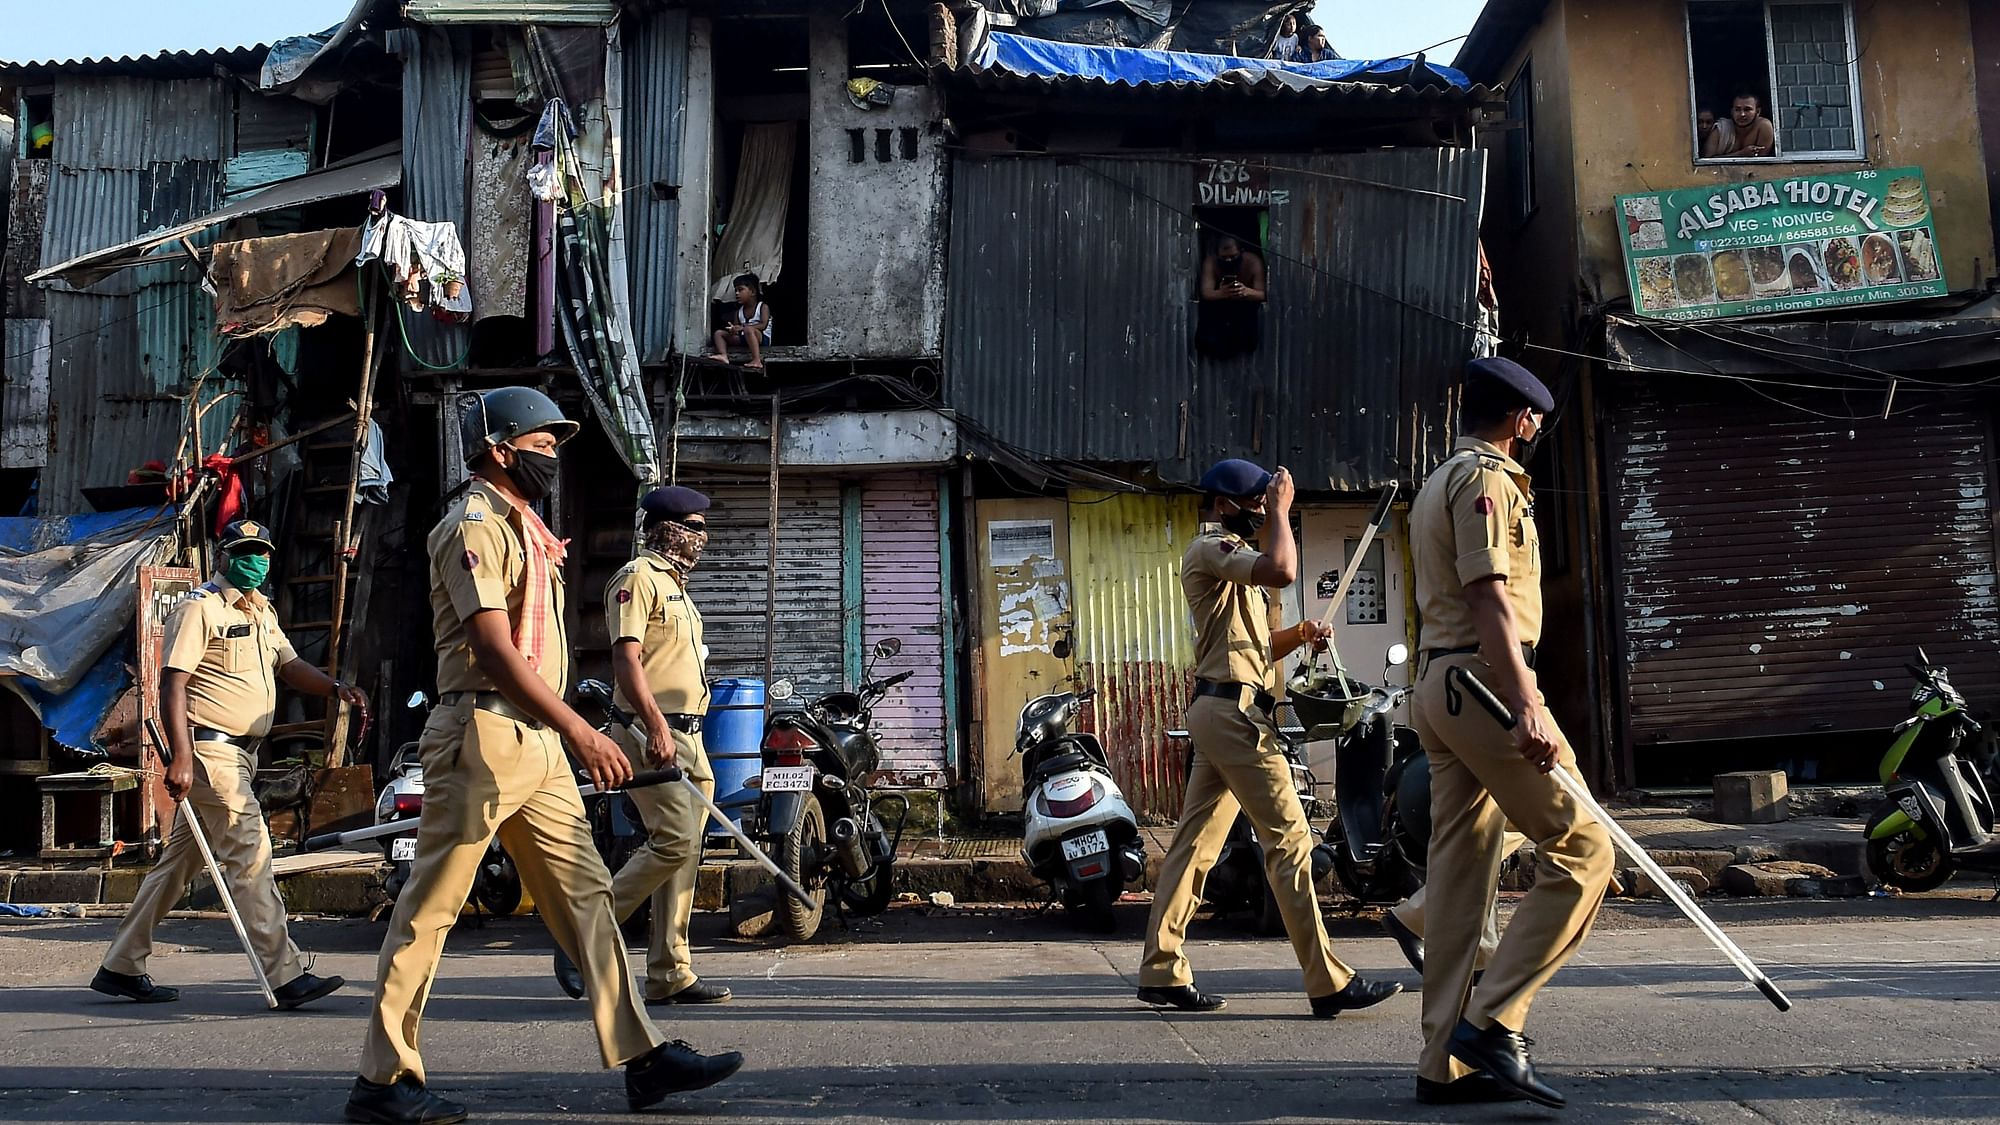 Police officers march on a street in Bandra during the coronavirus lockdown in Mumbai. Image used for representational purposes.&nbsp;